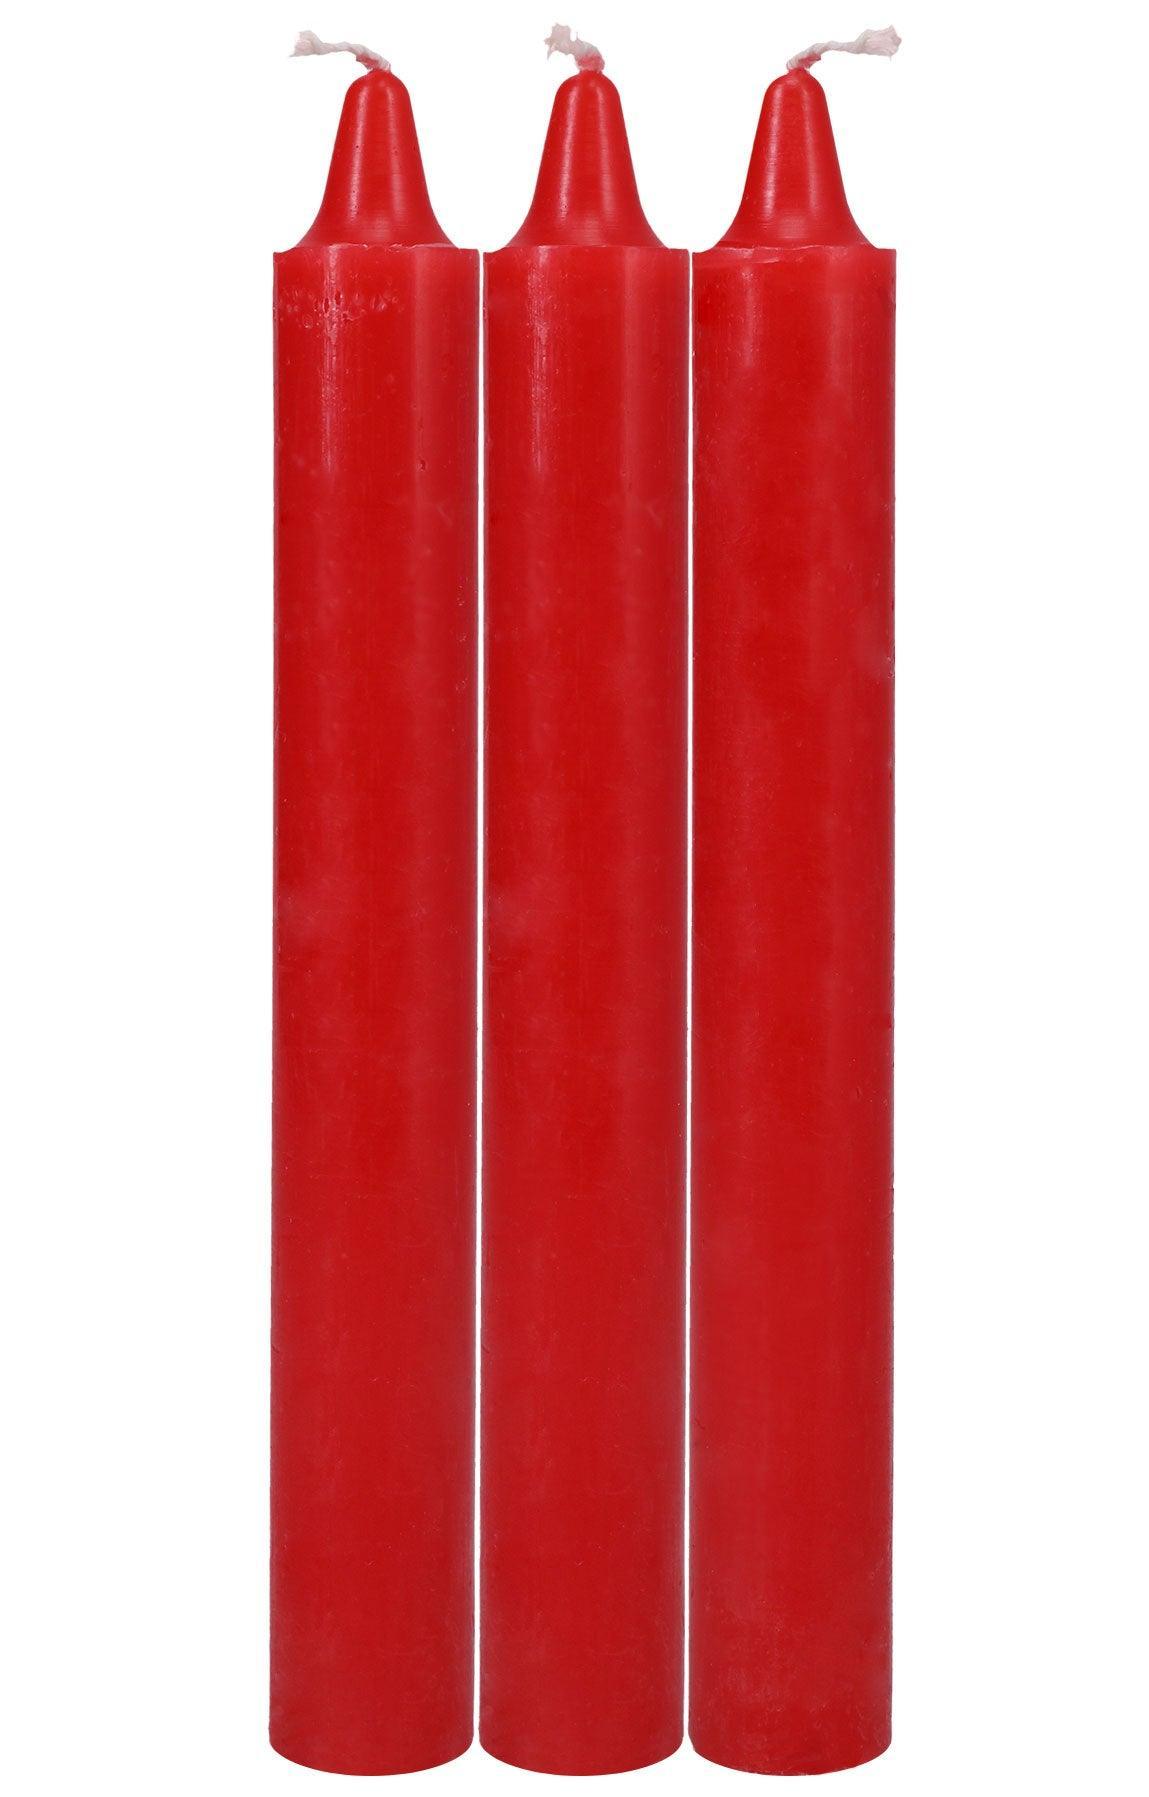 Japanese Drip Candles - 3 Pack - Red - My Sex Toy Hub